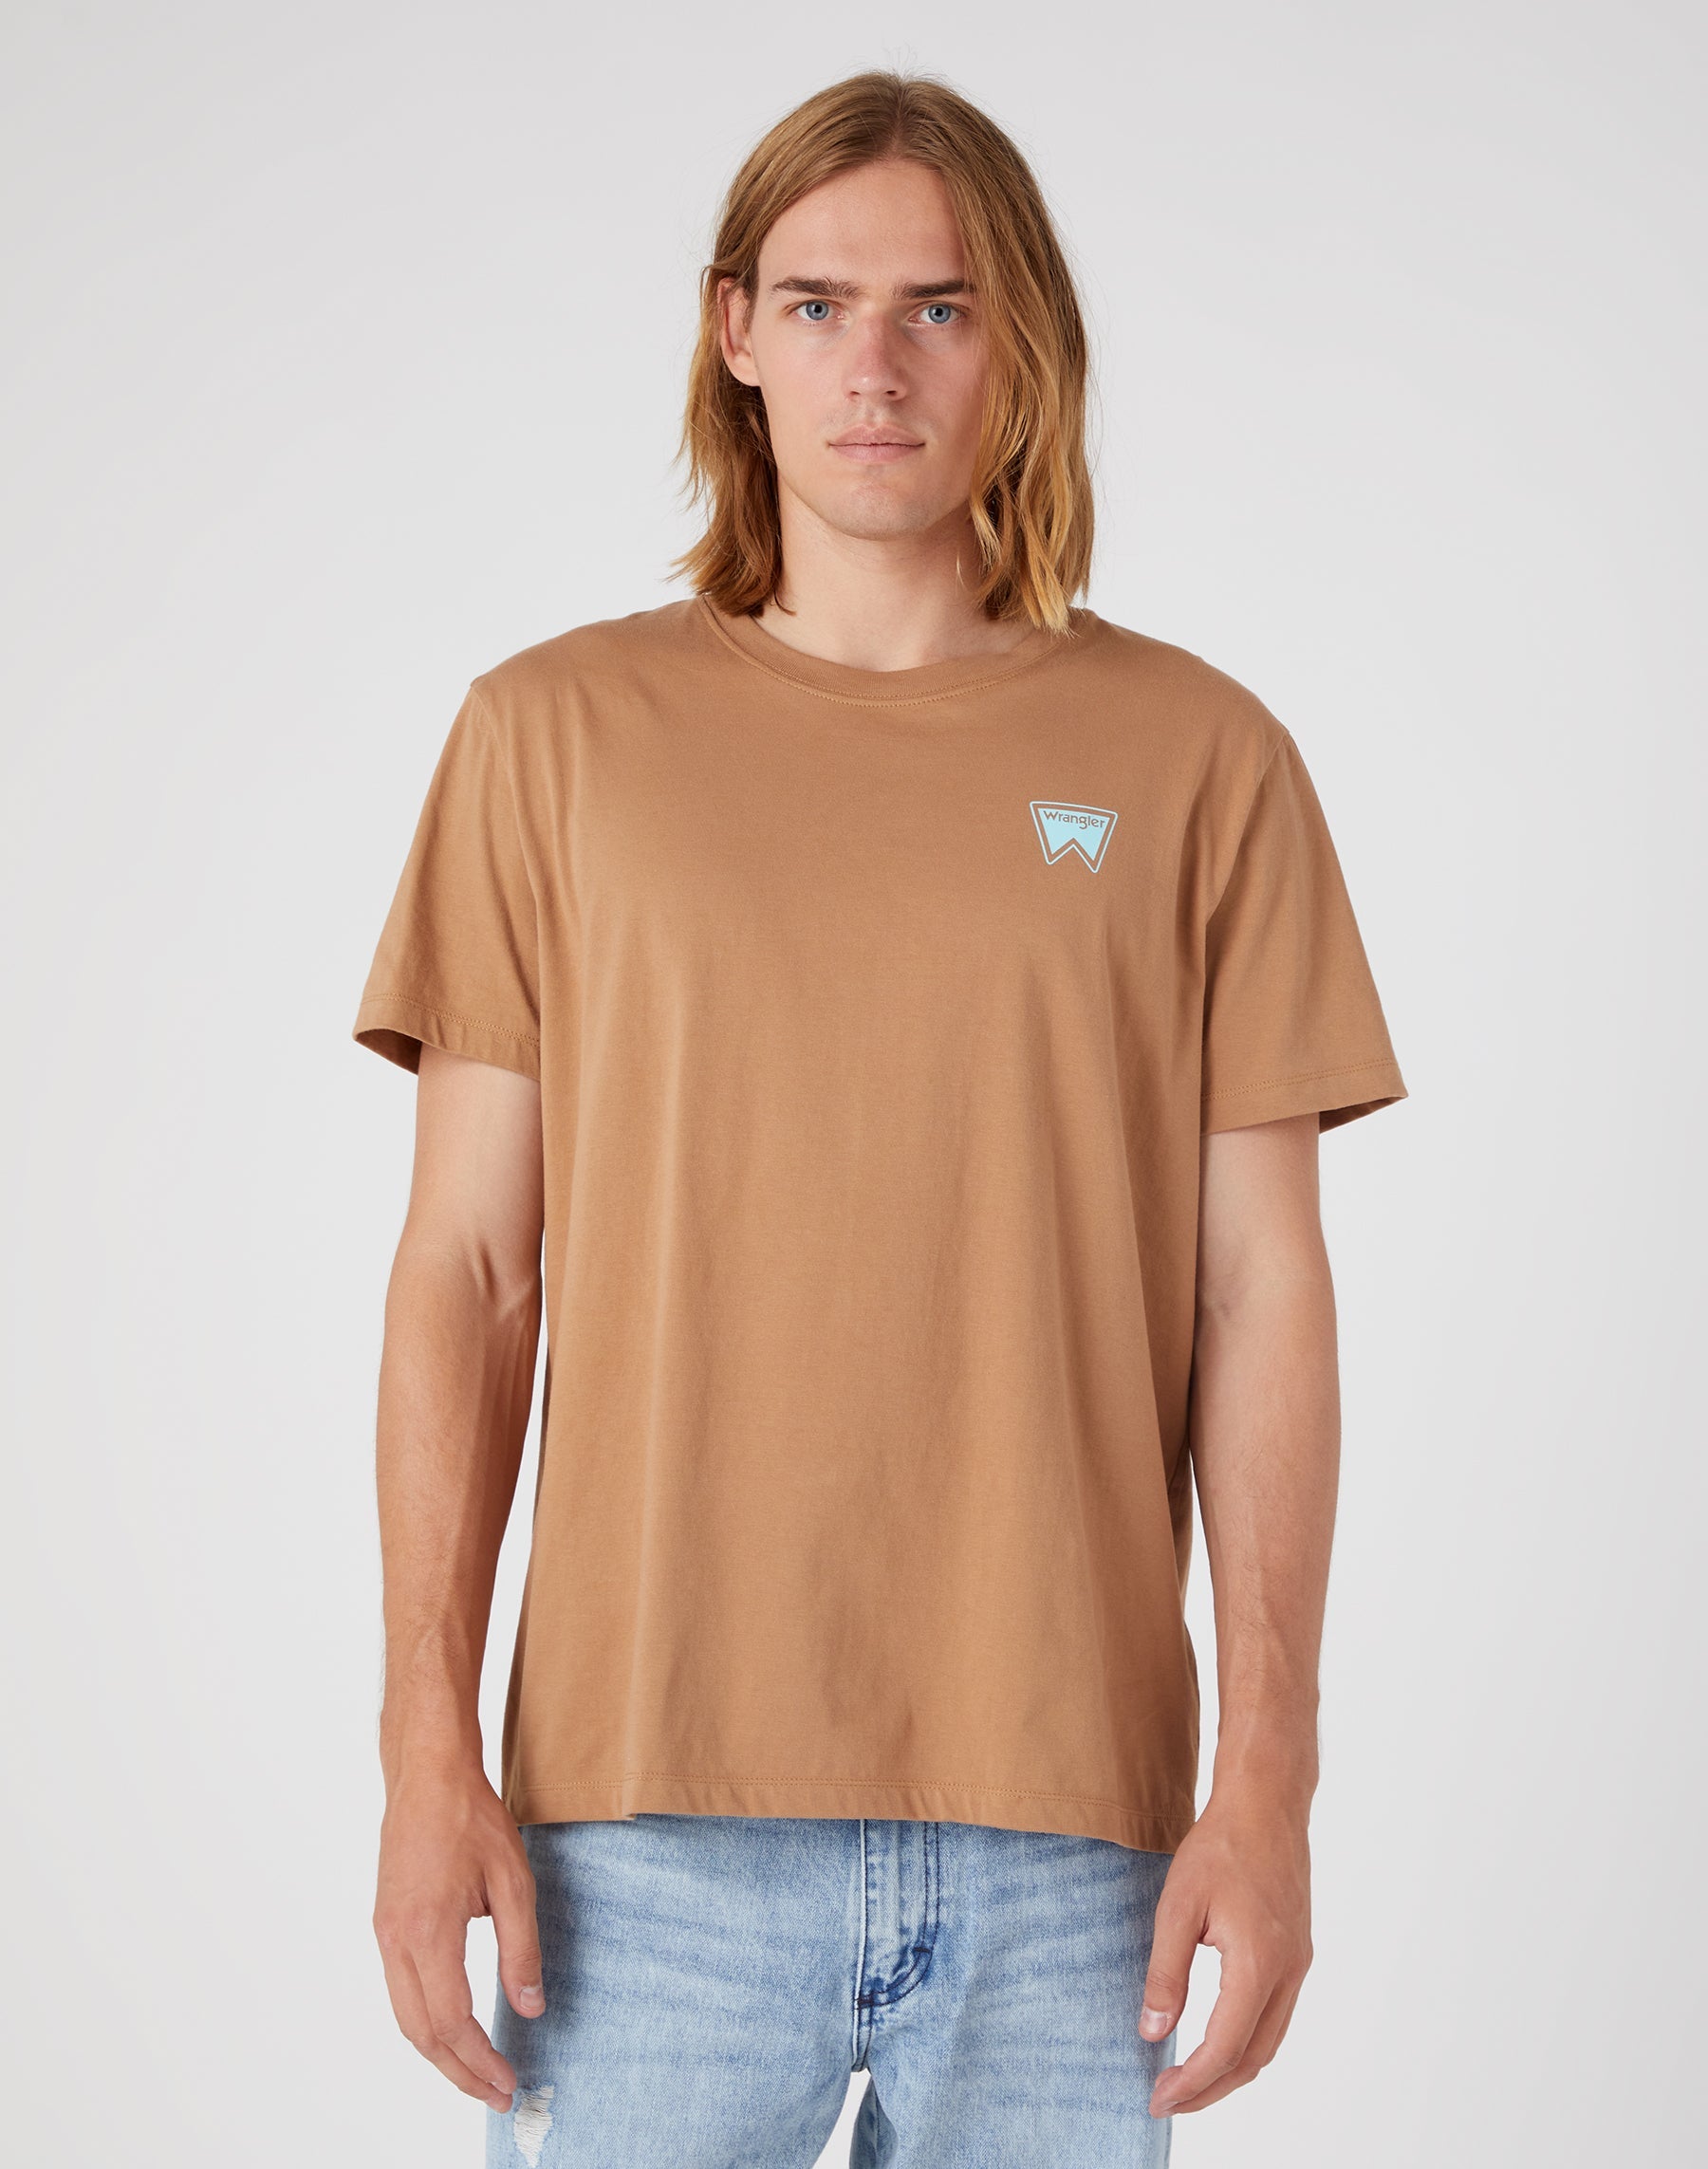 Graphic Tee in Burro Brown T-Shirts Wrangler   